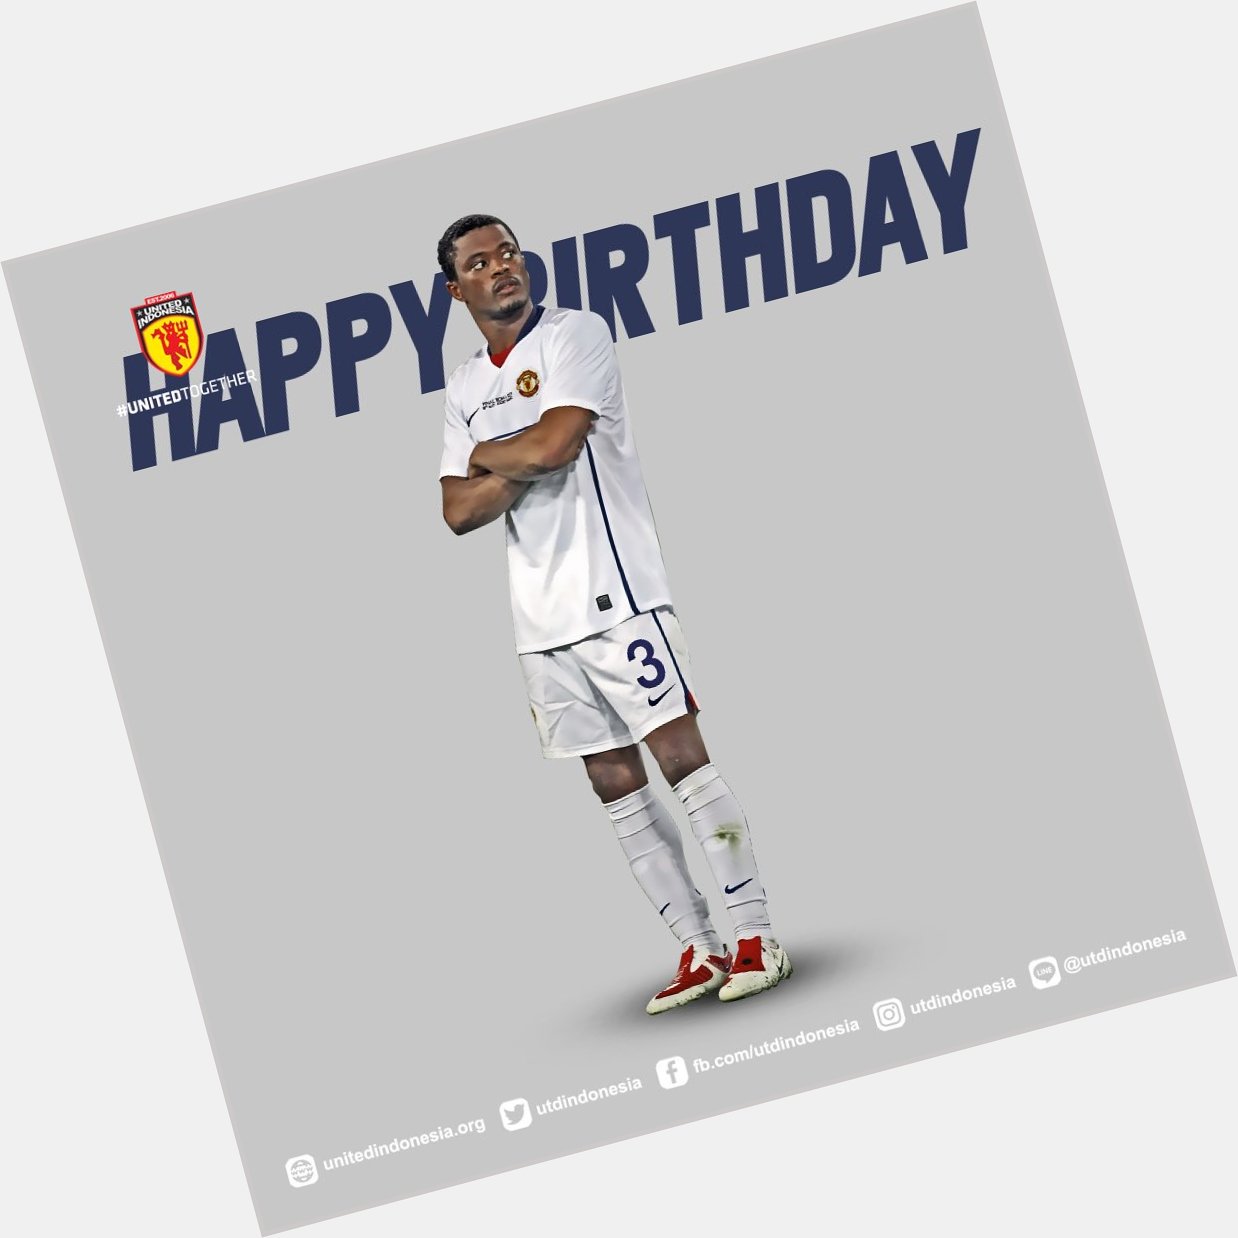 Happy Birthday Patrice Wish you all the best from Indonesia!  